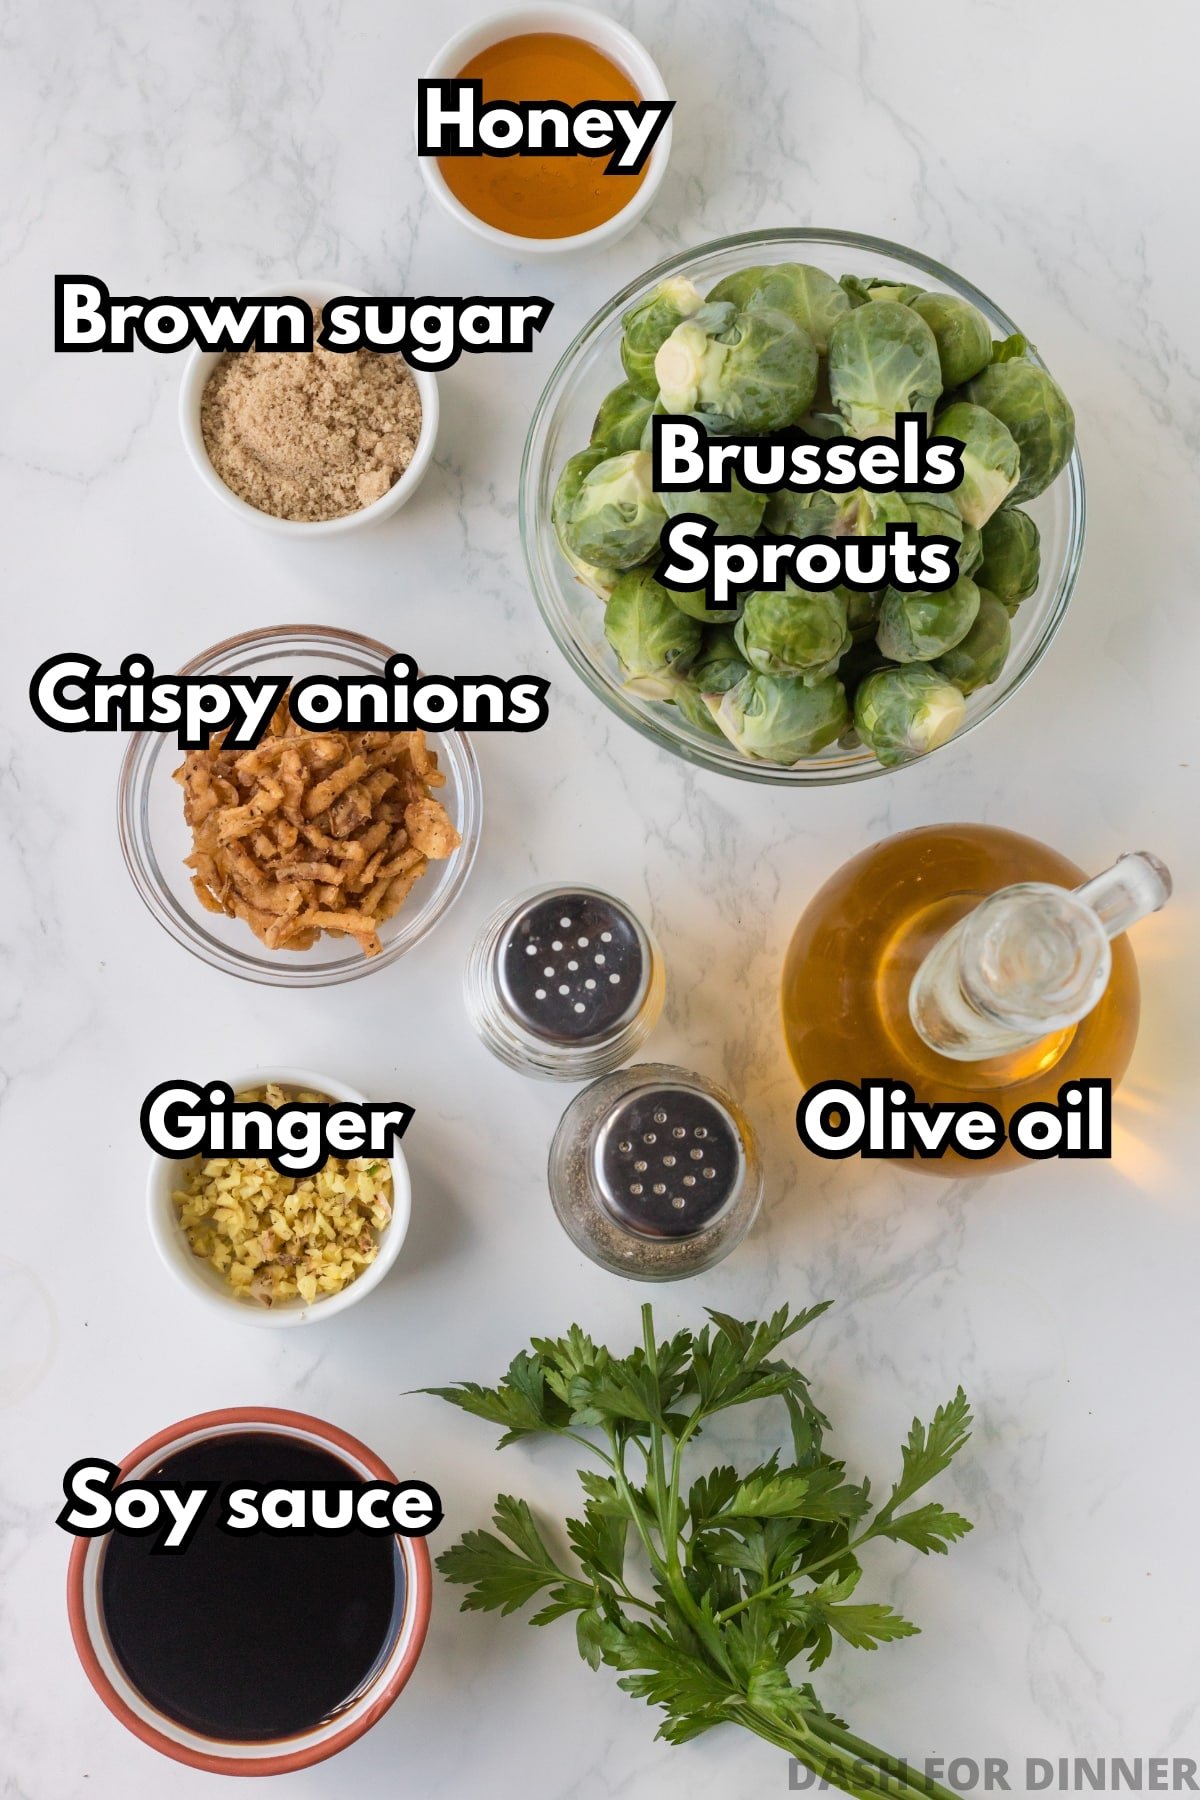 An overhead view of the ingredients needed to make Red Lobster's brussel sprouts: sprouts, soy sauce, ginger, olive oil, crispy onions, brown sugar, and honey.